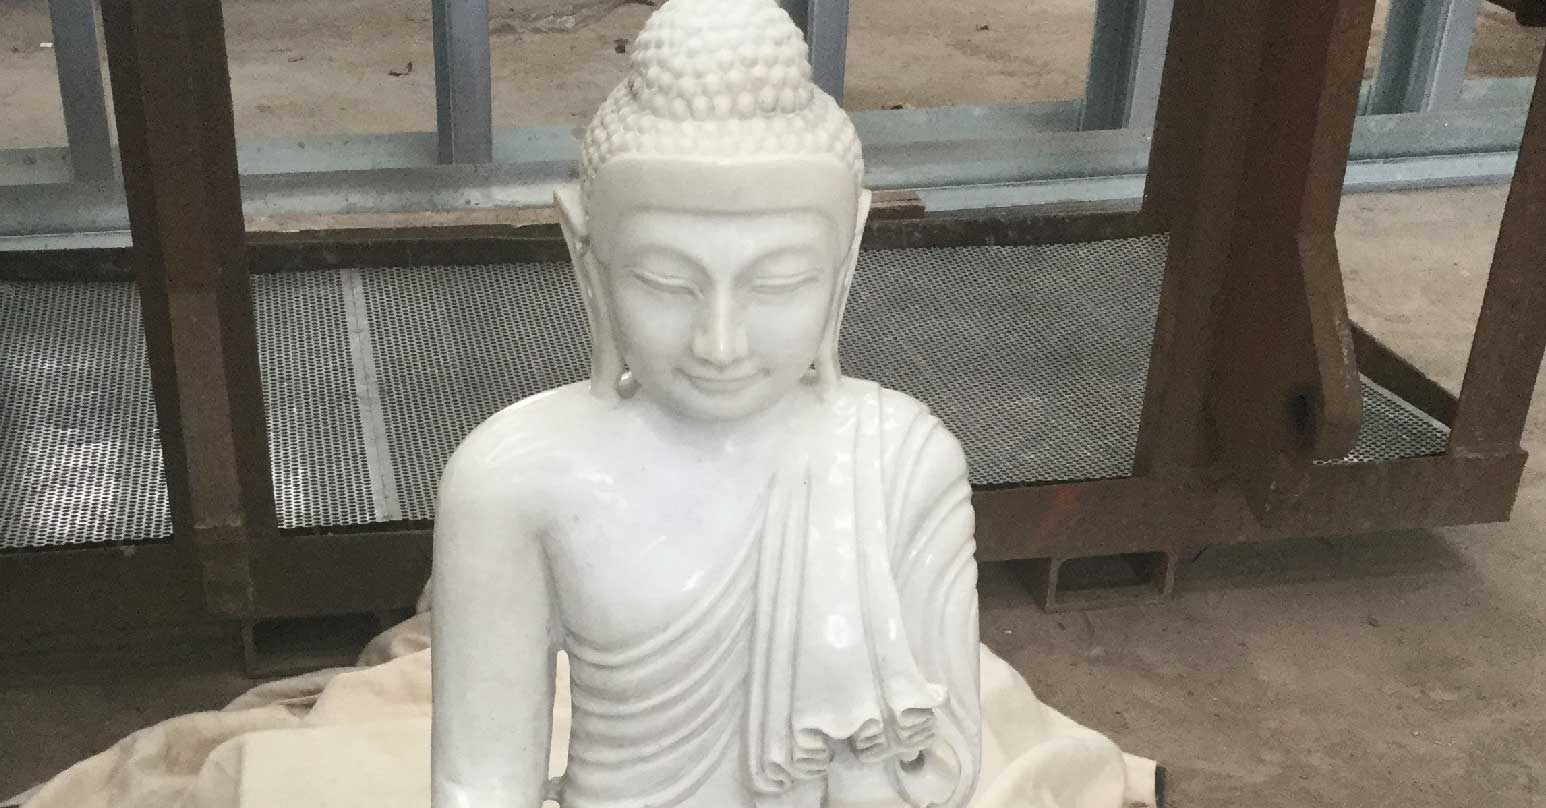 Stained Budda statue - After repair